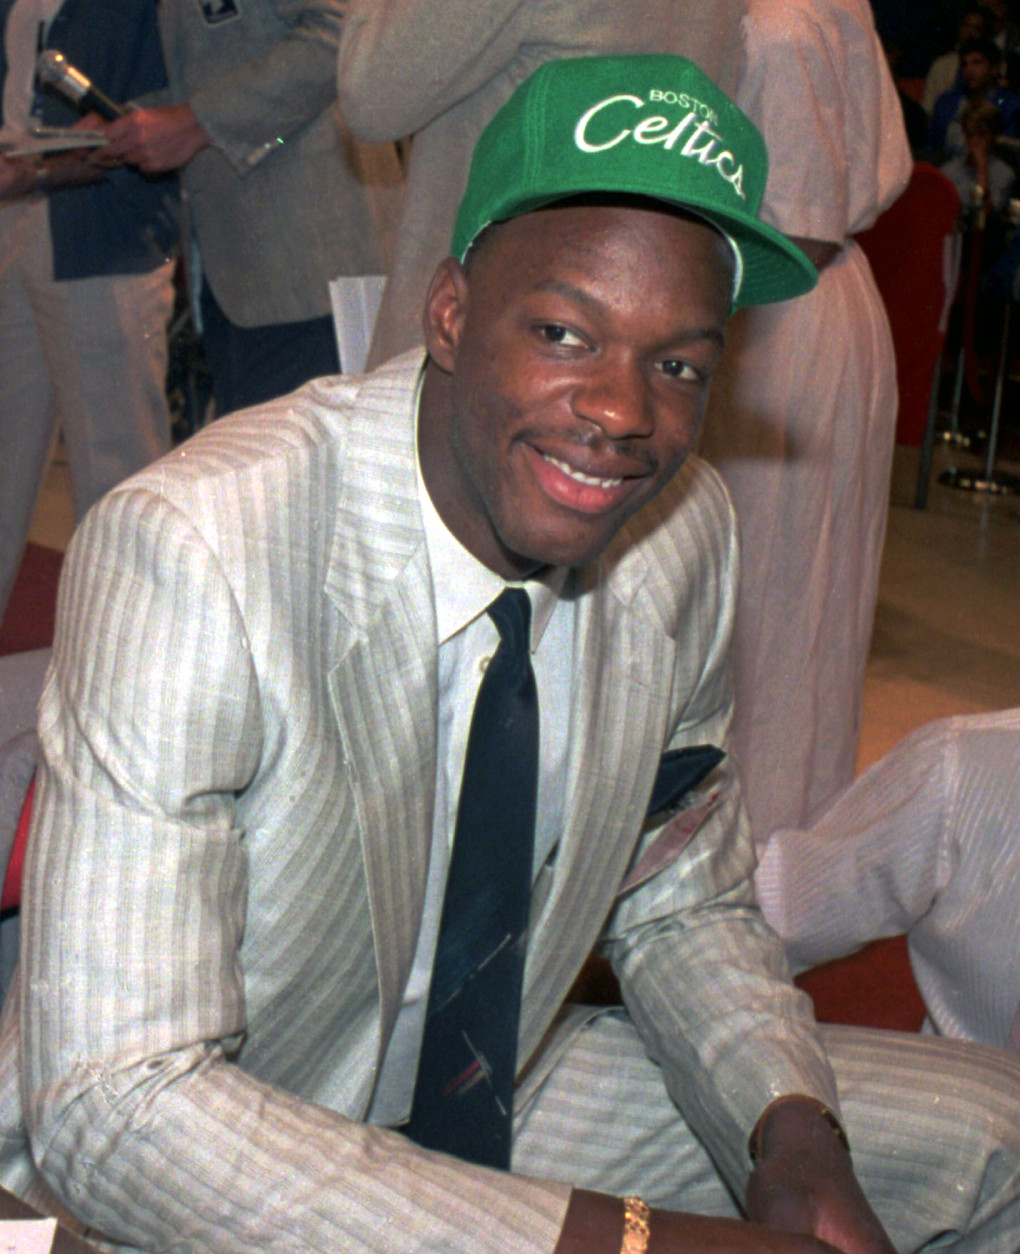 Len Bias wears a Boston Celtics hat after being selected as the No. 2 pick in the NBA draft in New York, June 17, 1986. Two days later, on June 19, Bias died of a cocaine overdose in a Maryland dormitory room during a party to celebrate his success. Bias' death changed the way the nation perceived cocaine, shattered the Celtics' dream of remaining among the NBA's elite and sent the Maryland athletic program into a tailspin that lasted nearly a decade. When he completed his extraordinary basketball career at the University of Maryland, the only question surrounding Len Bias was whether he would dominate the NBA in the same fashion he ruled the Atlantic Coast Conference. Twenty years later, many still wonder (AP Photo/File)